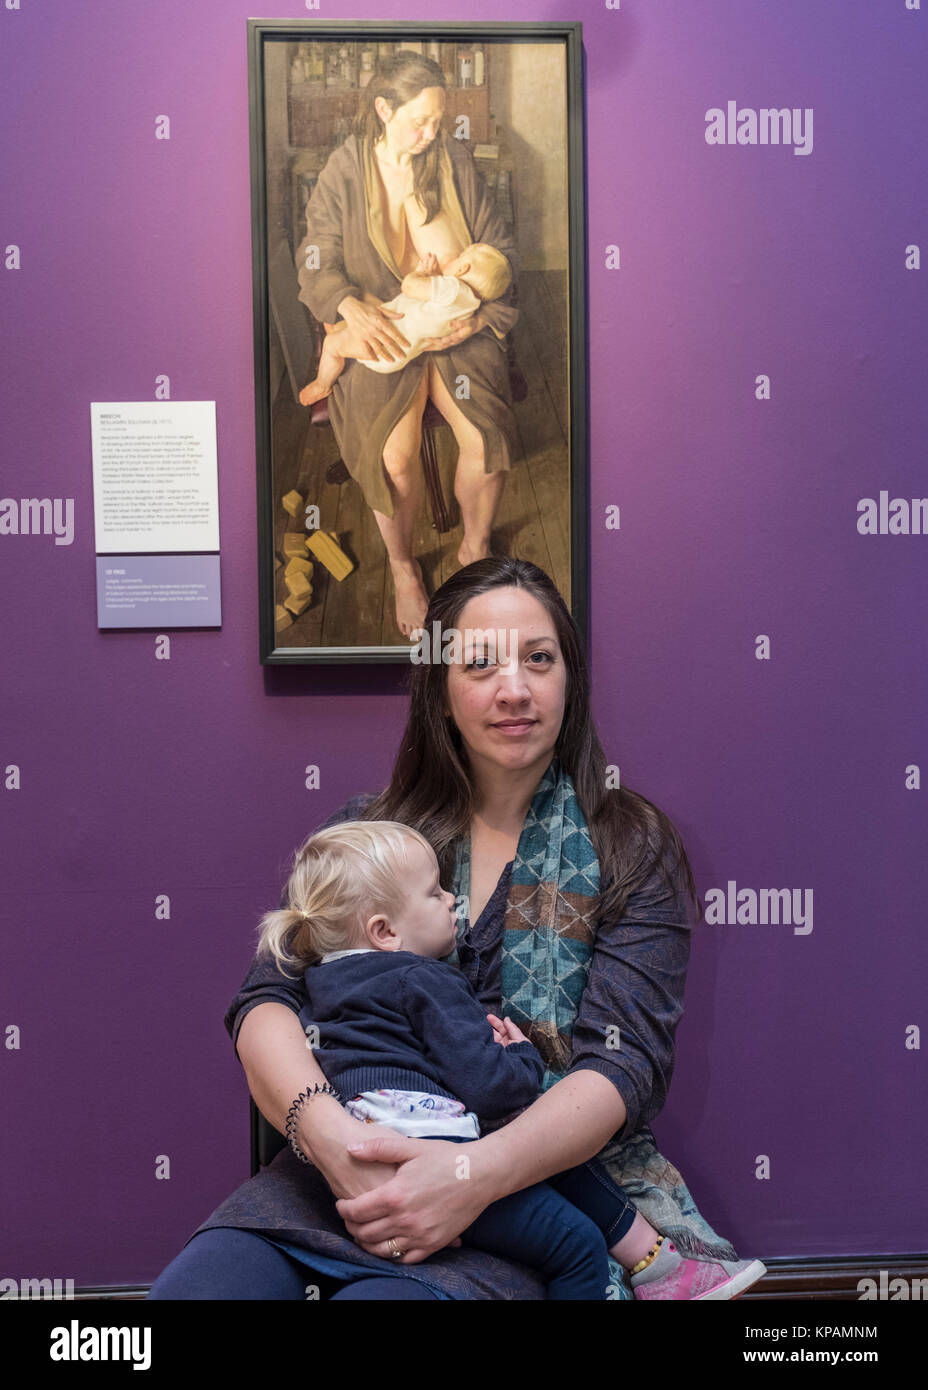 Edinburgh, Scotland, United Kingdom. 14 December, 2017.   Winning painting of BP Portrait Award 2017, Breech! With the subject of the painting, artist's wife Virginia and her baby at the opening of the exhibition. The BP Portrait Award 2017 opens at the Scottish National Portrait Gallery on 16 December 2017. Credit: Iain Masterton/Alamy Live News Stock Photo